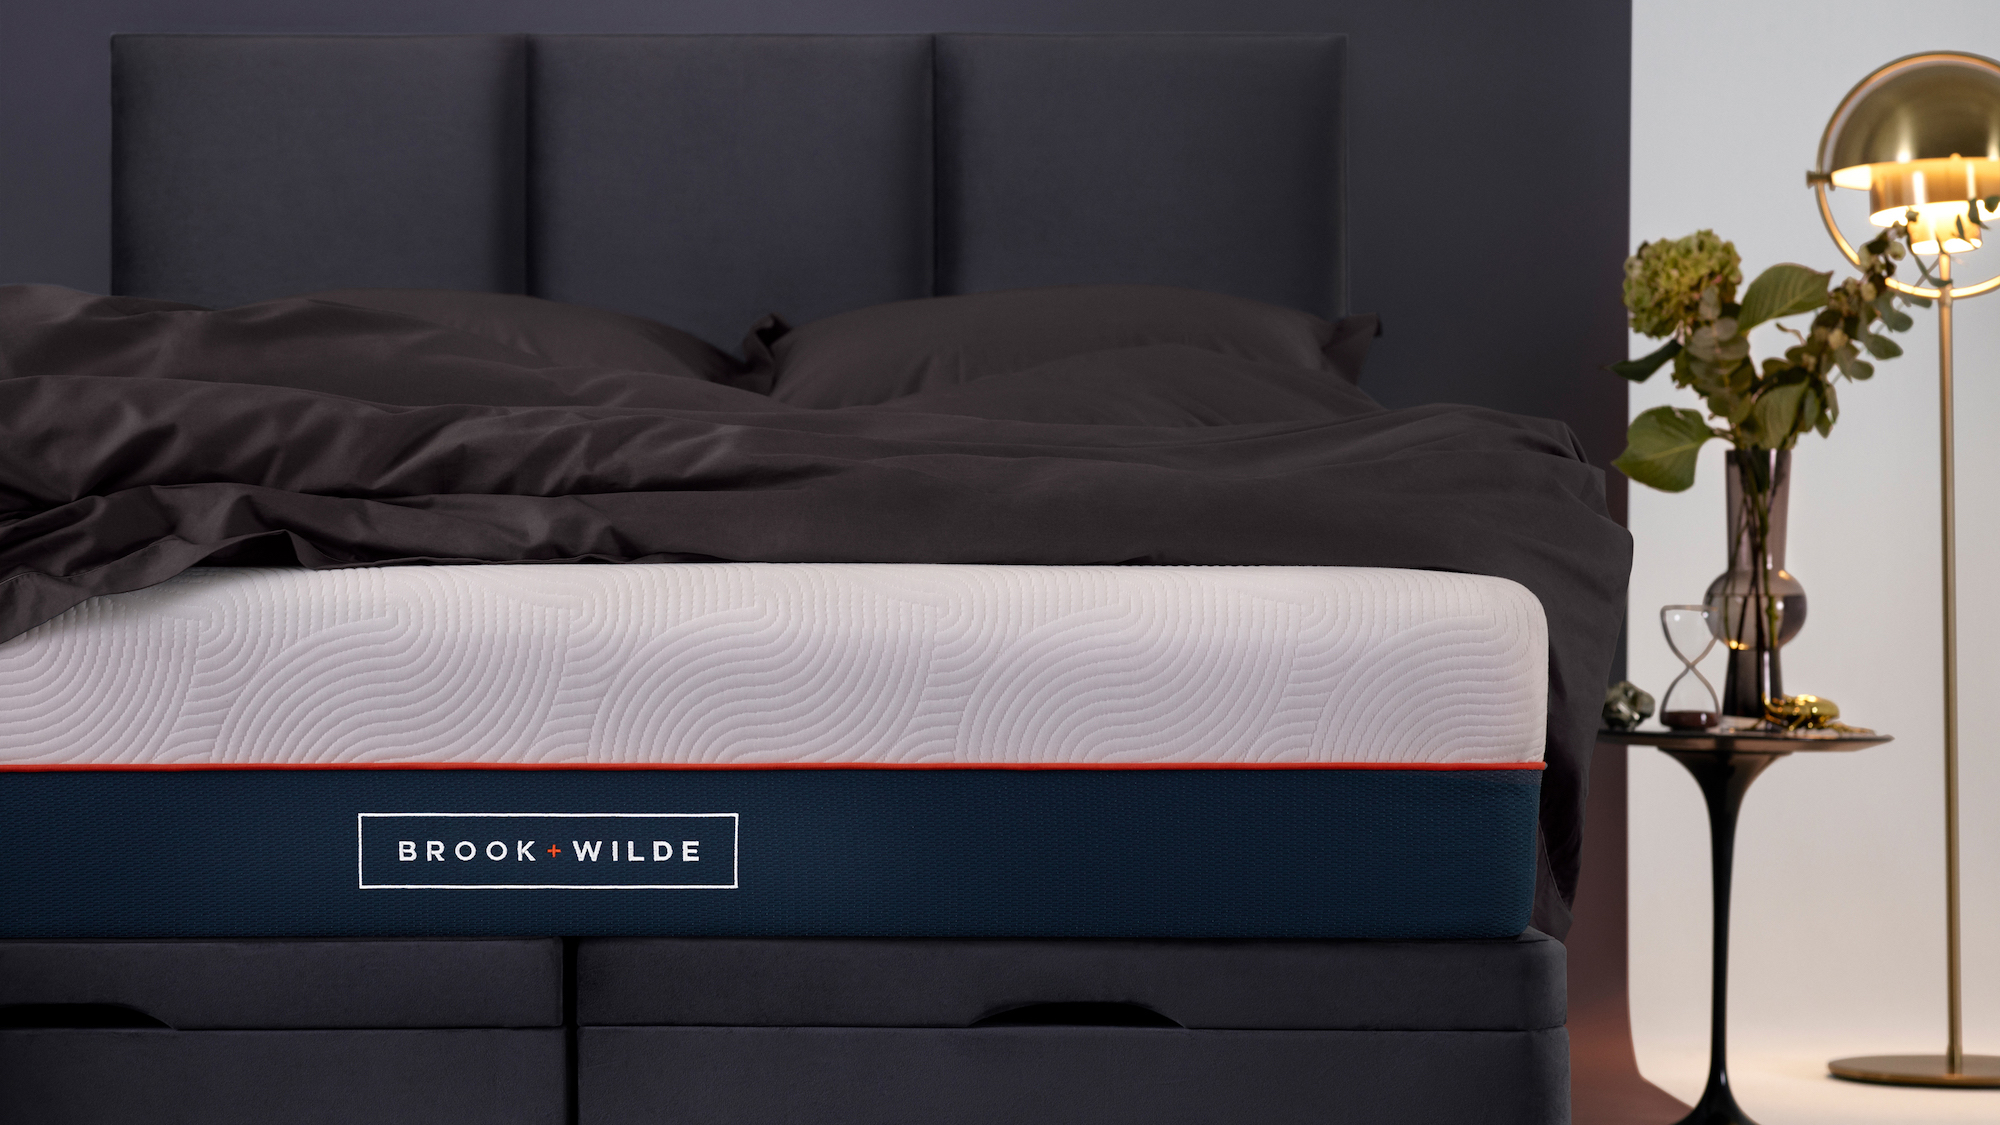 The Brook and Wilde The Lux mattress placed on a black ottoman bed with storage